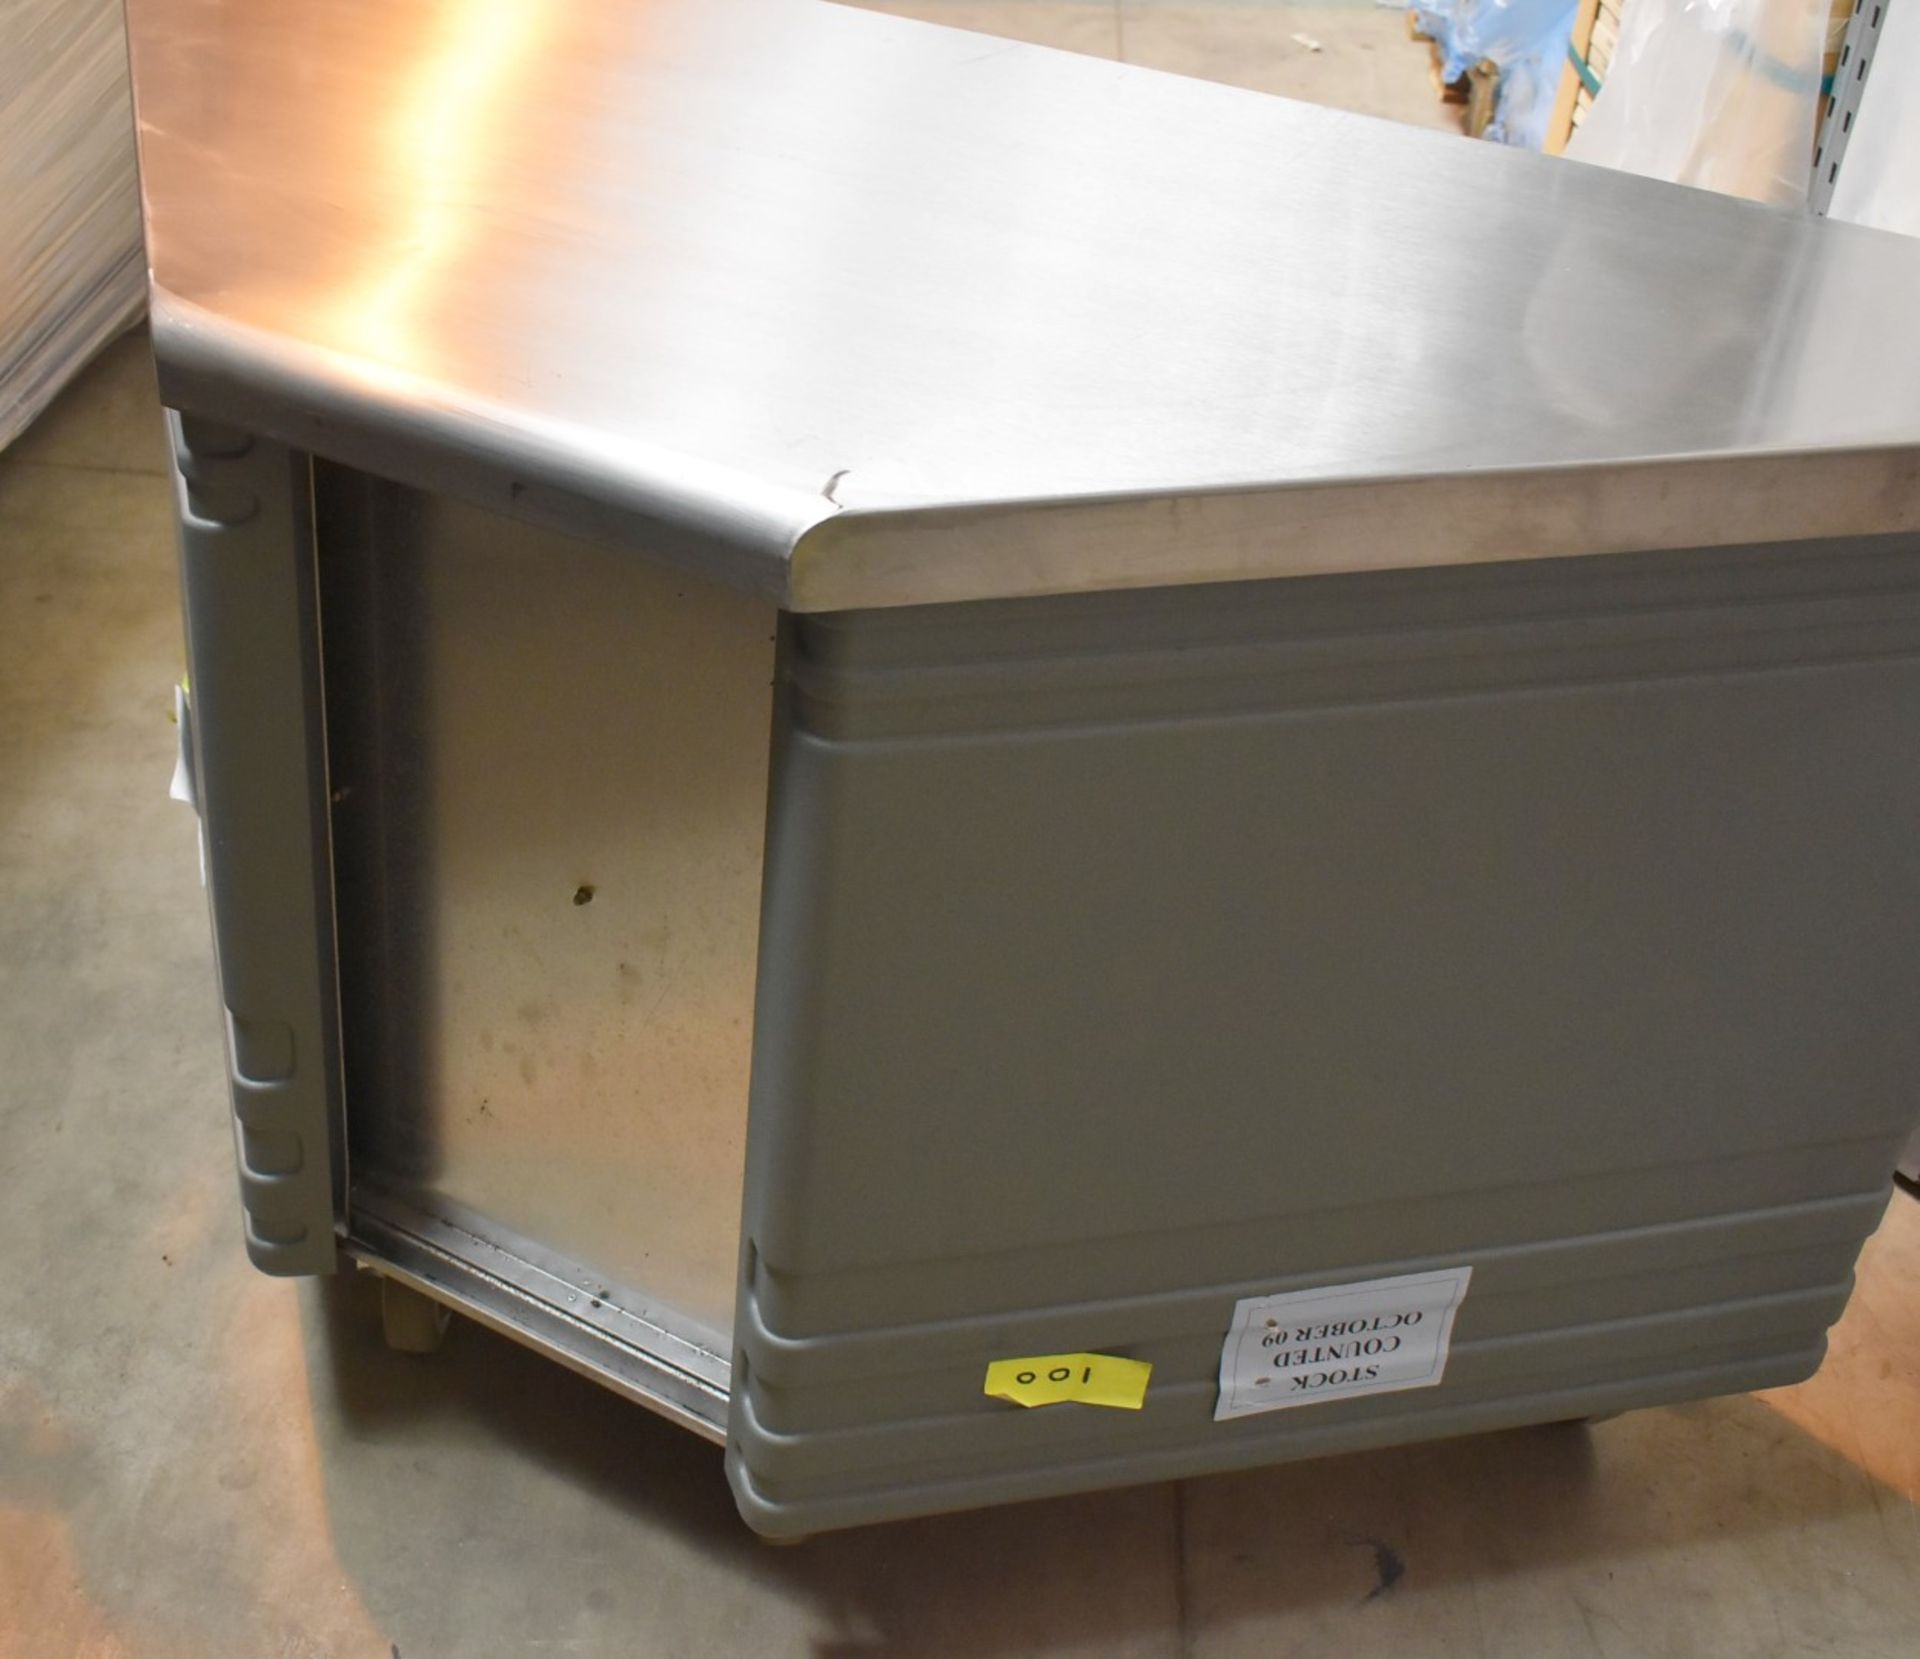 2 x Grundy Commercial Mobile Corner Units Suitable For Restaurants, Hotels, Events - Features Grey - Image 2 of 10